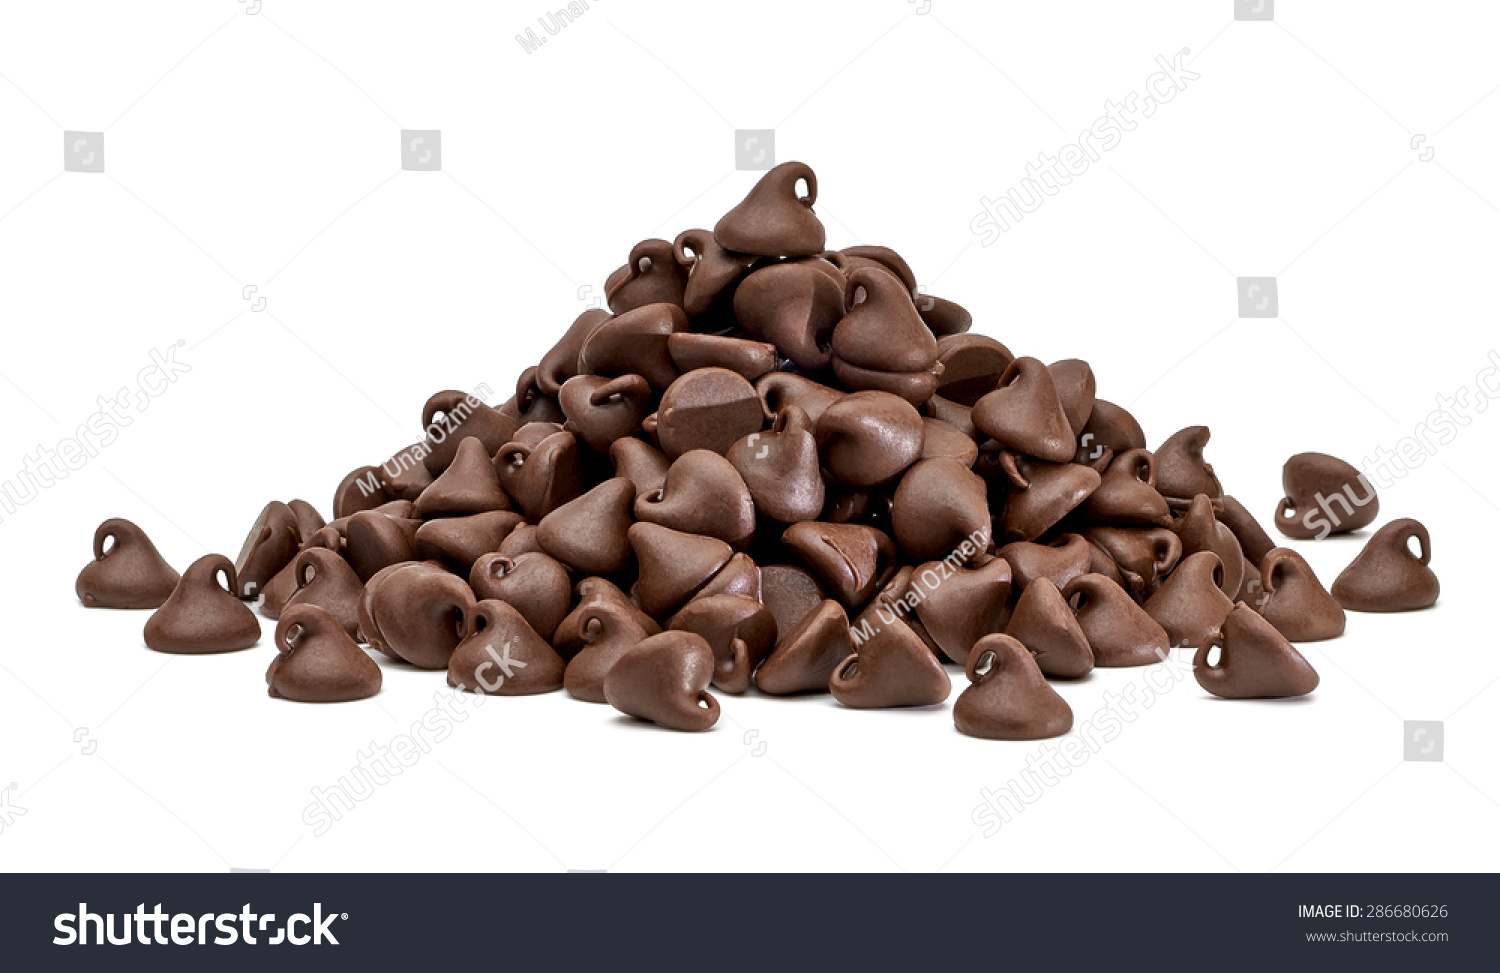 Chocolate chips morsels or drops pile or heap isolated on white background #286680626